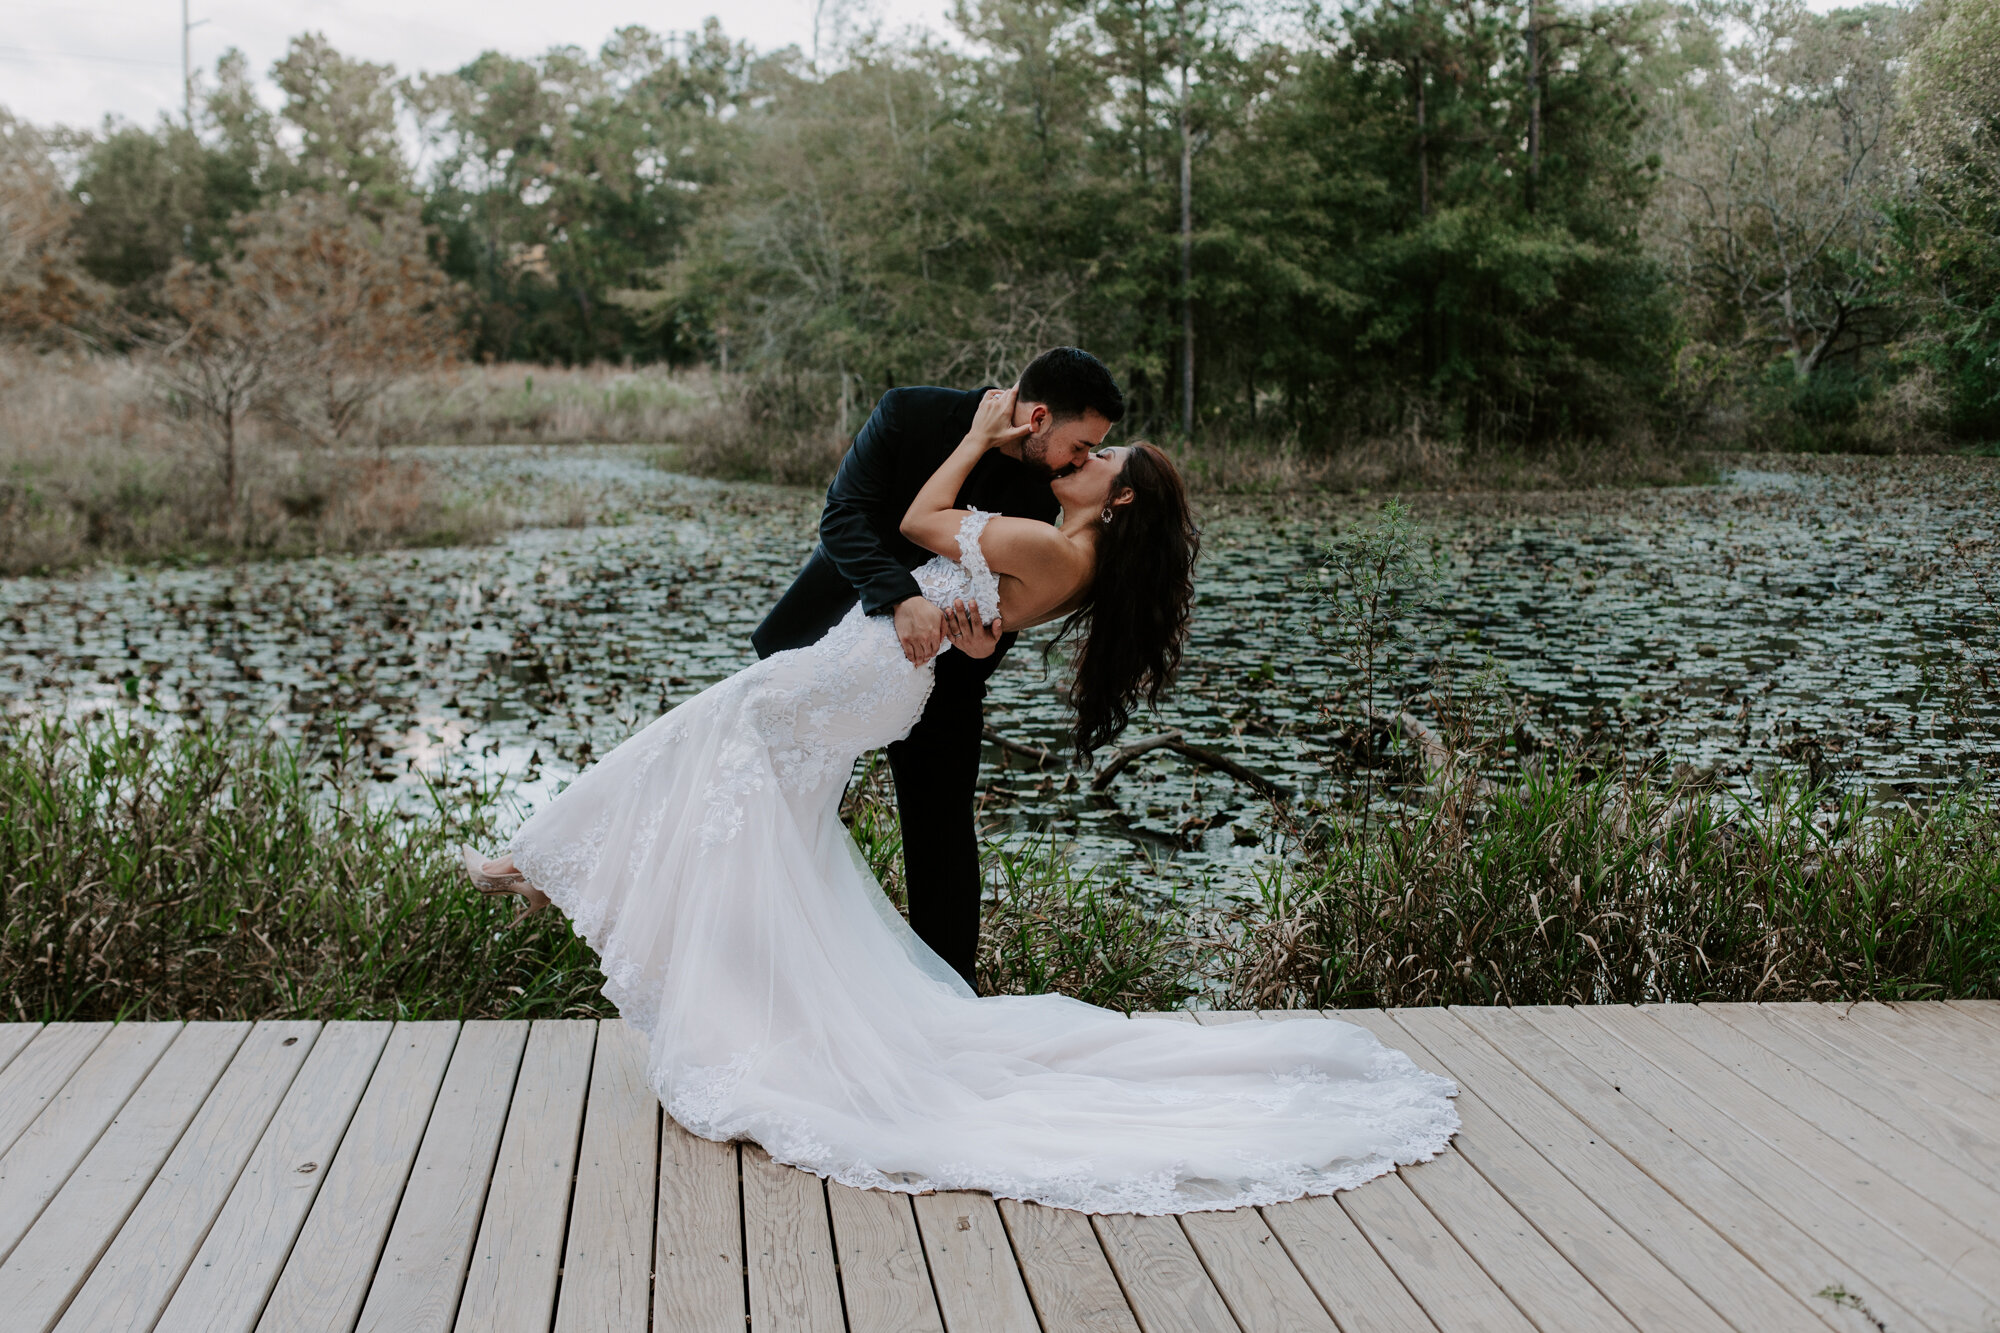 Dip and kiss. Trash the Dress Bride and Groom Photo Session at Houston Arboretum and Nature Center